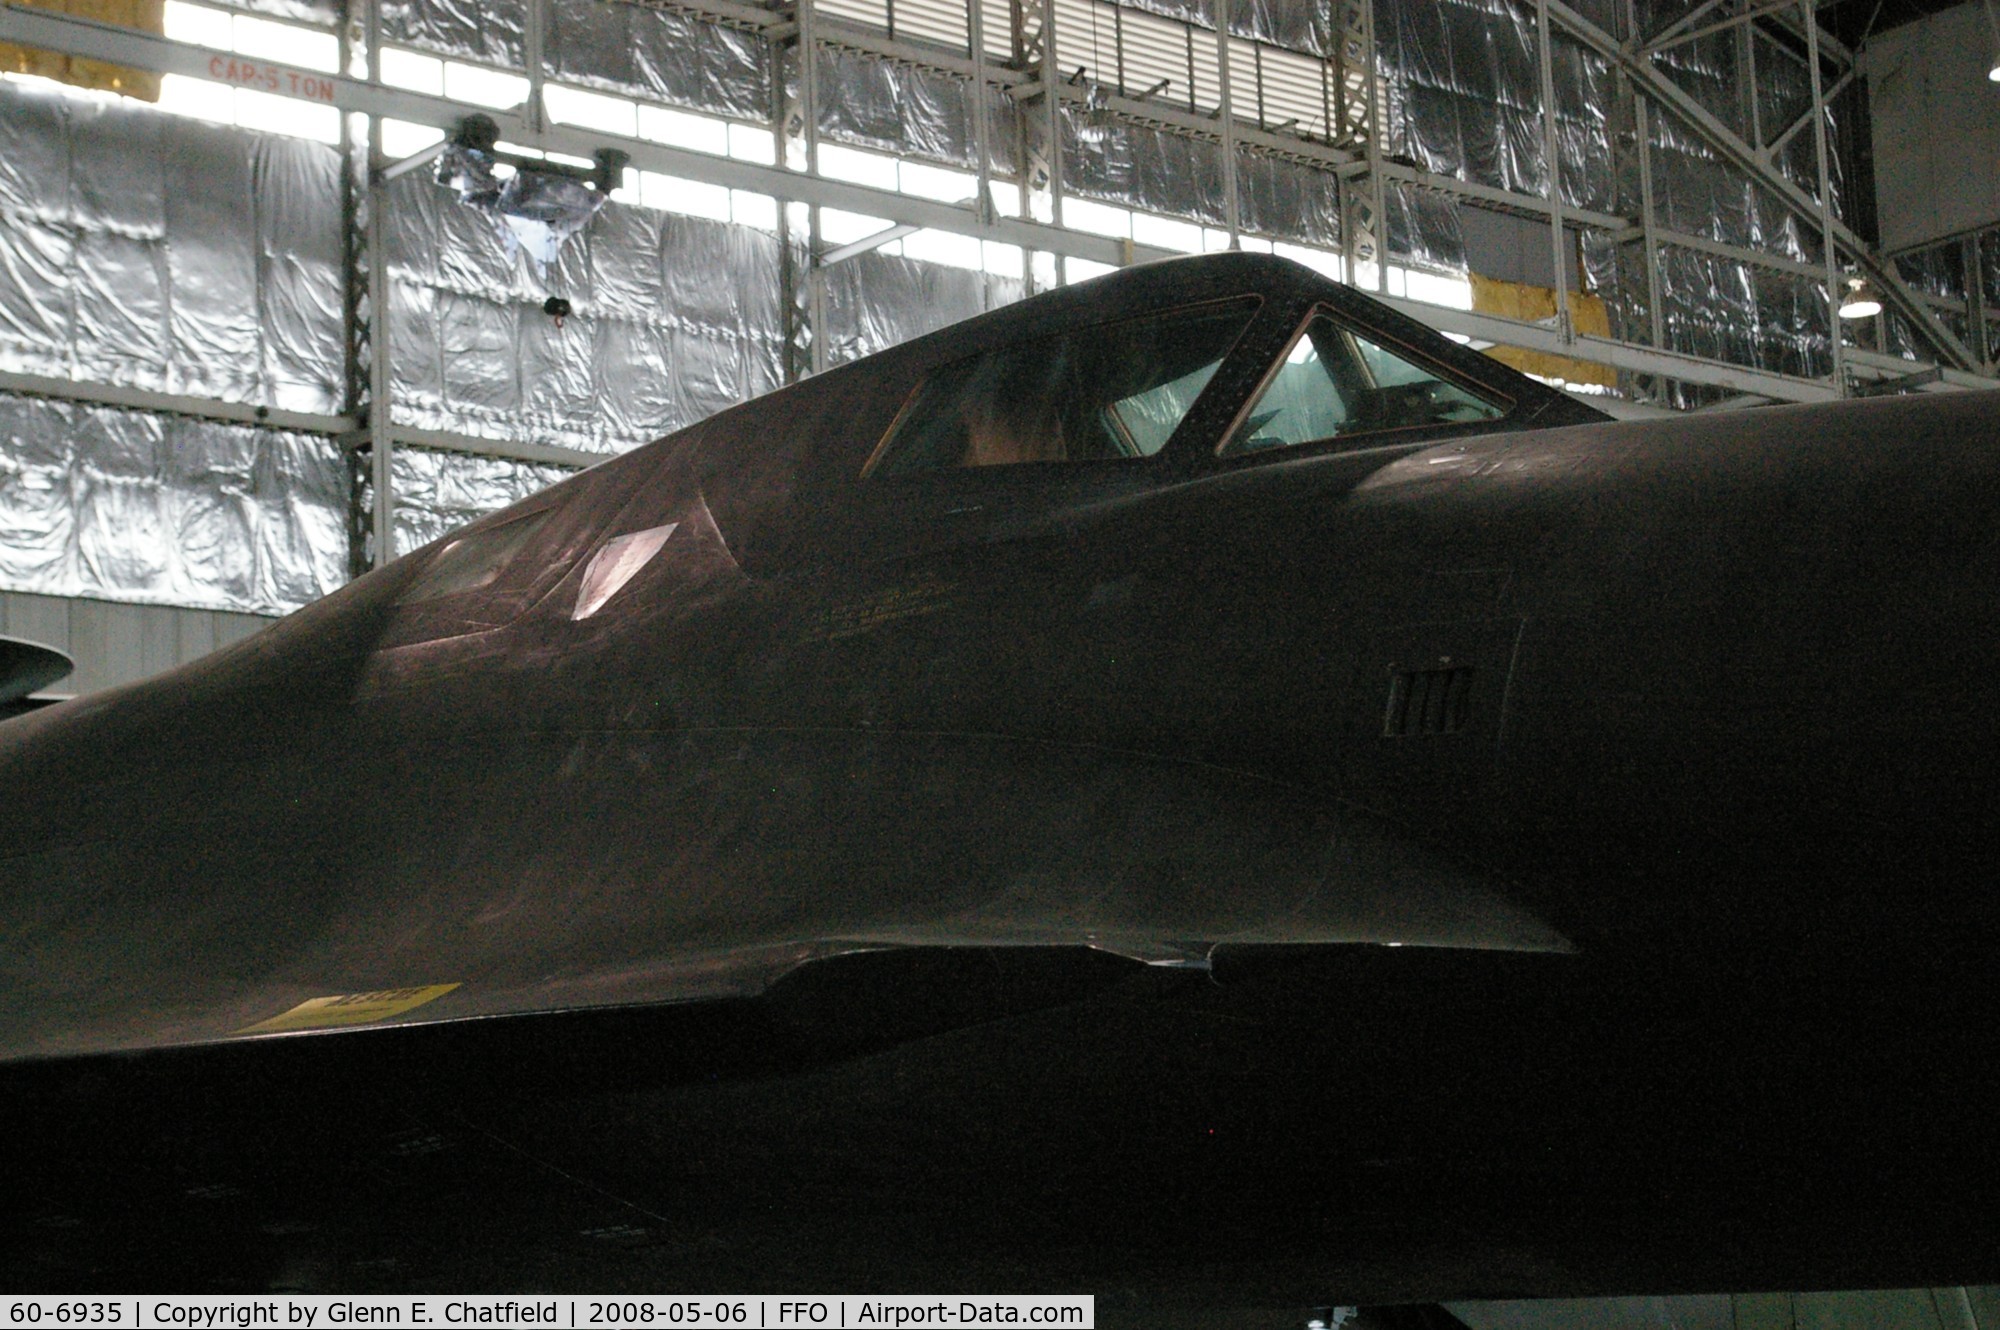 60-6935, 1963 Lockheed YF-12A C/N 1002, Nose close-up at the Air Force Museum